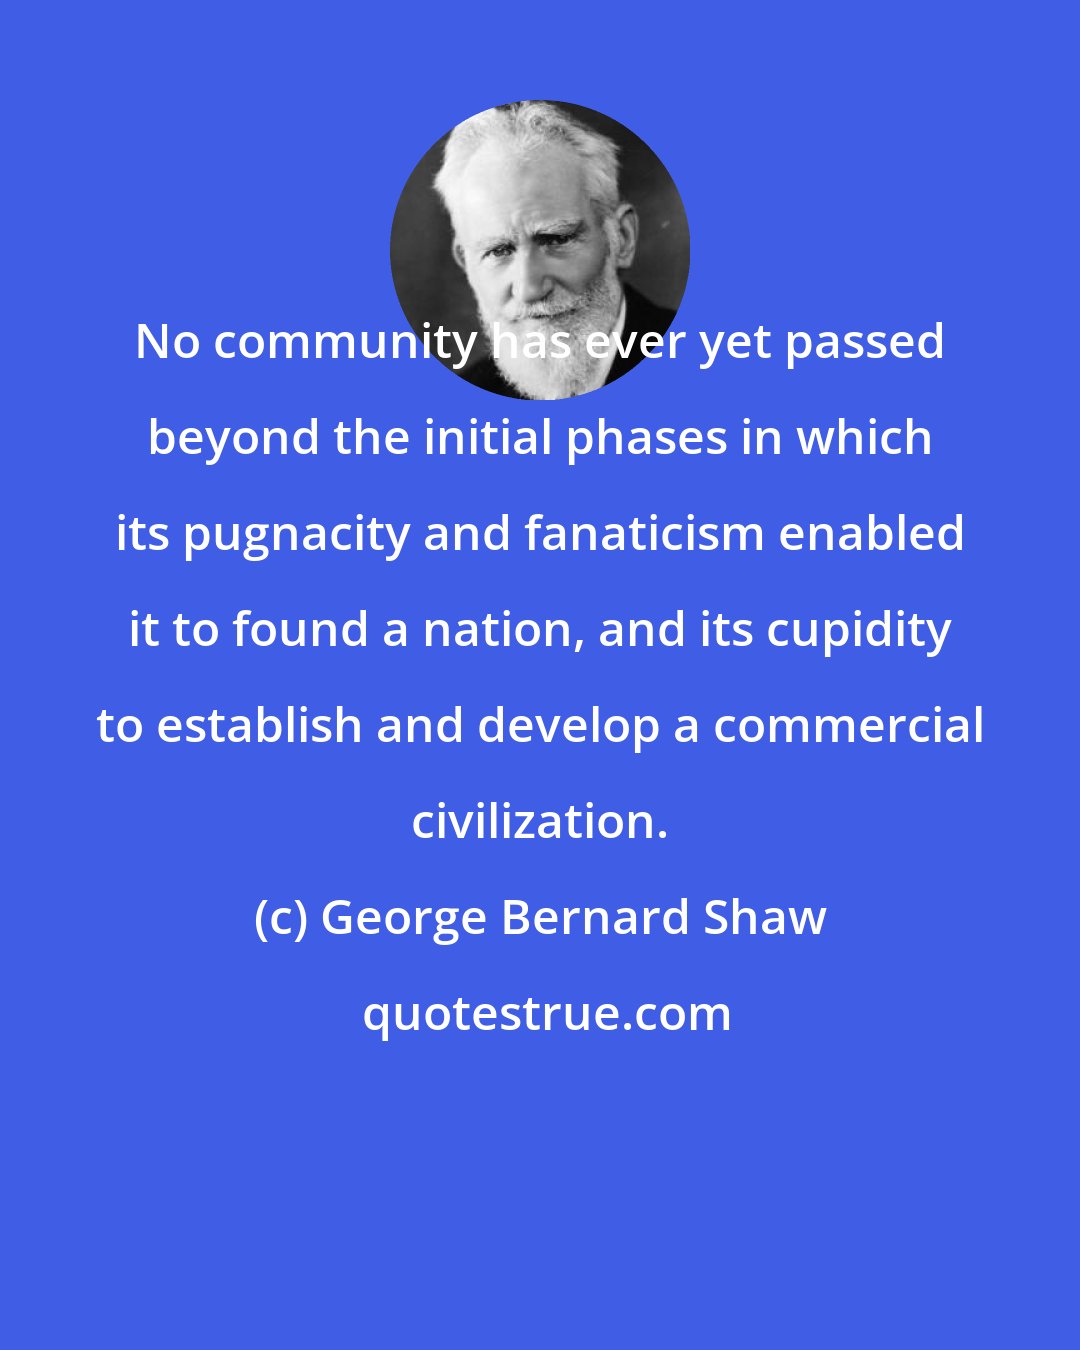 George Bernard Shaw: No community has ever yet passed beyond the initial phases in which its pugnacity and fanaticism enabled it to found a nation, and its cupidity to establish and develop a commercial civilization.